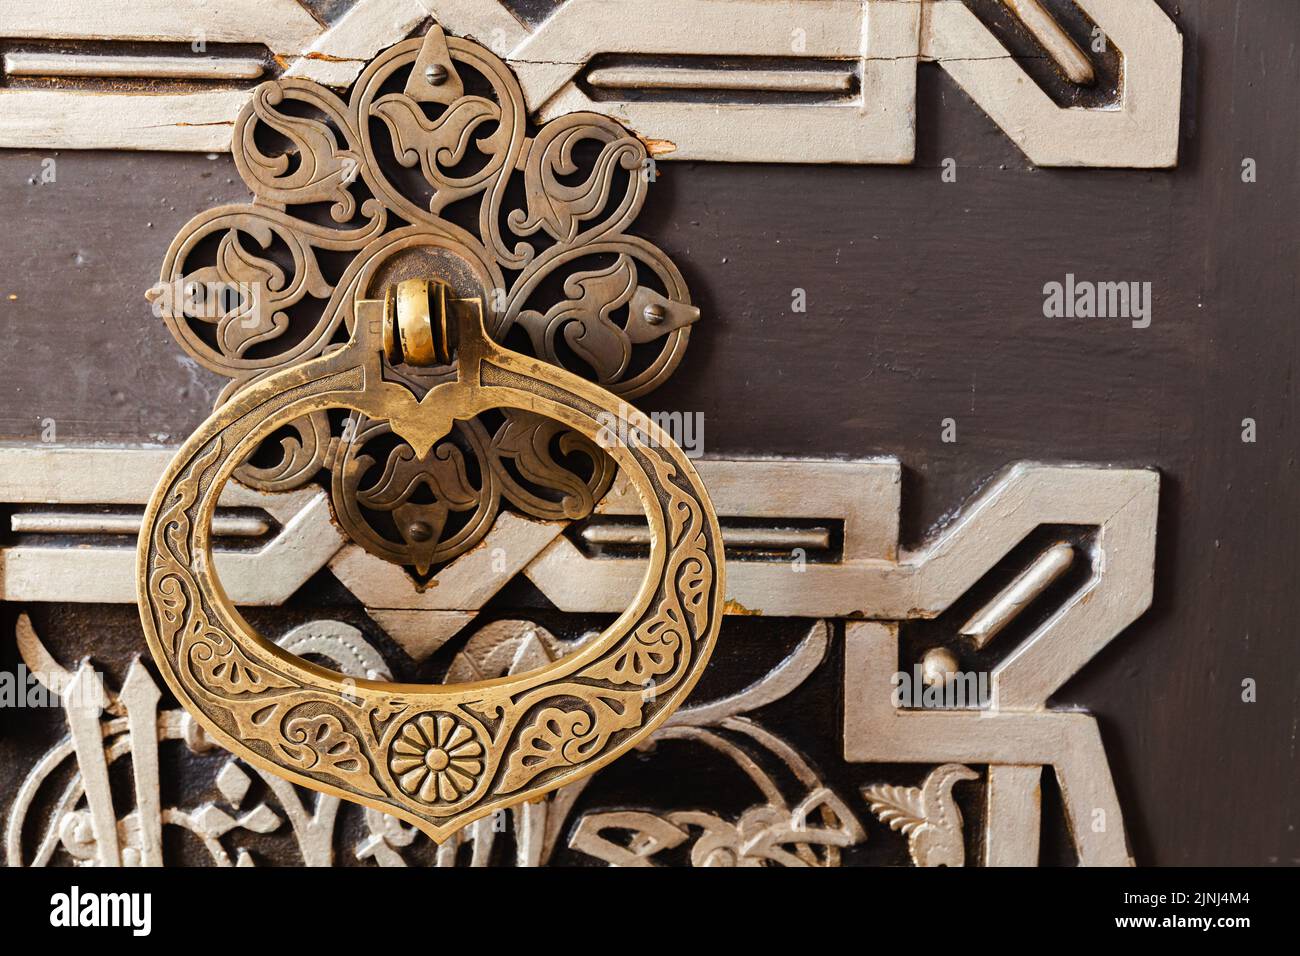 Vintage handle on an old oriental wooden door decorated with ornaments Stock Photo